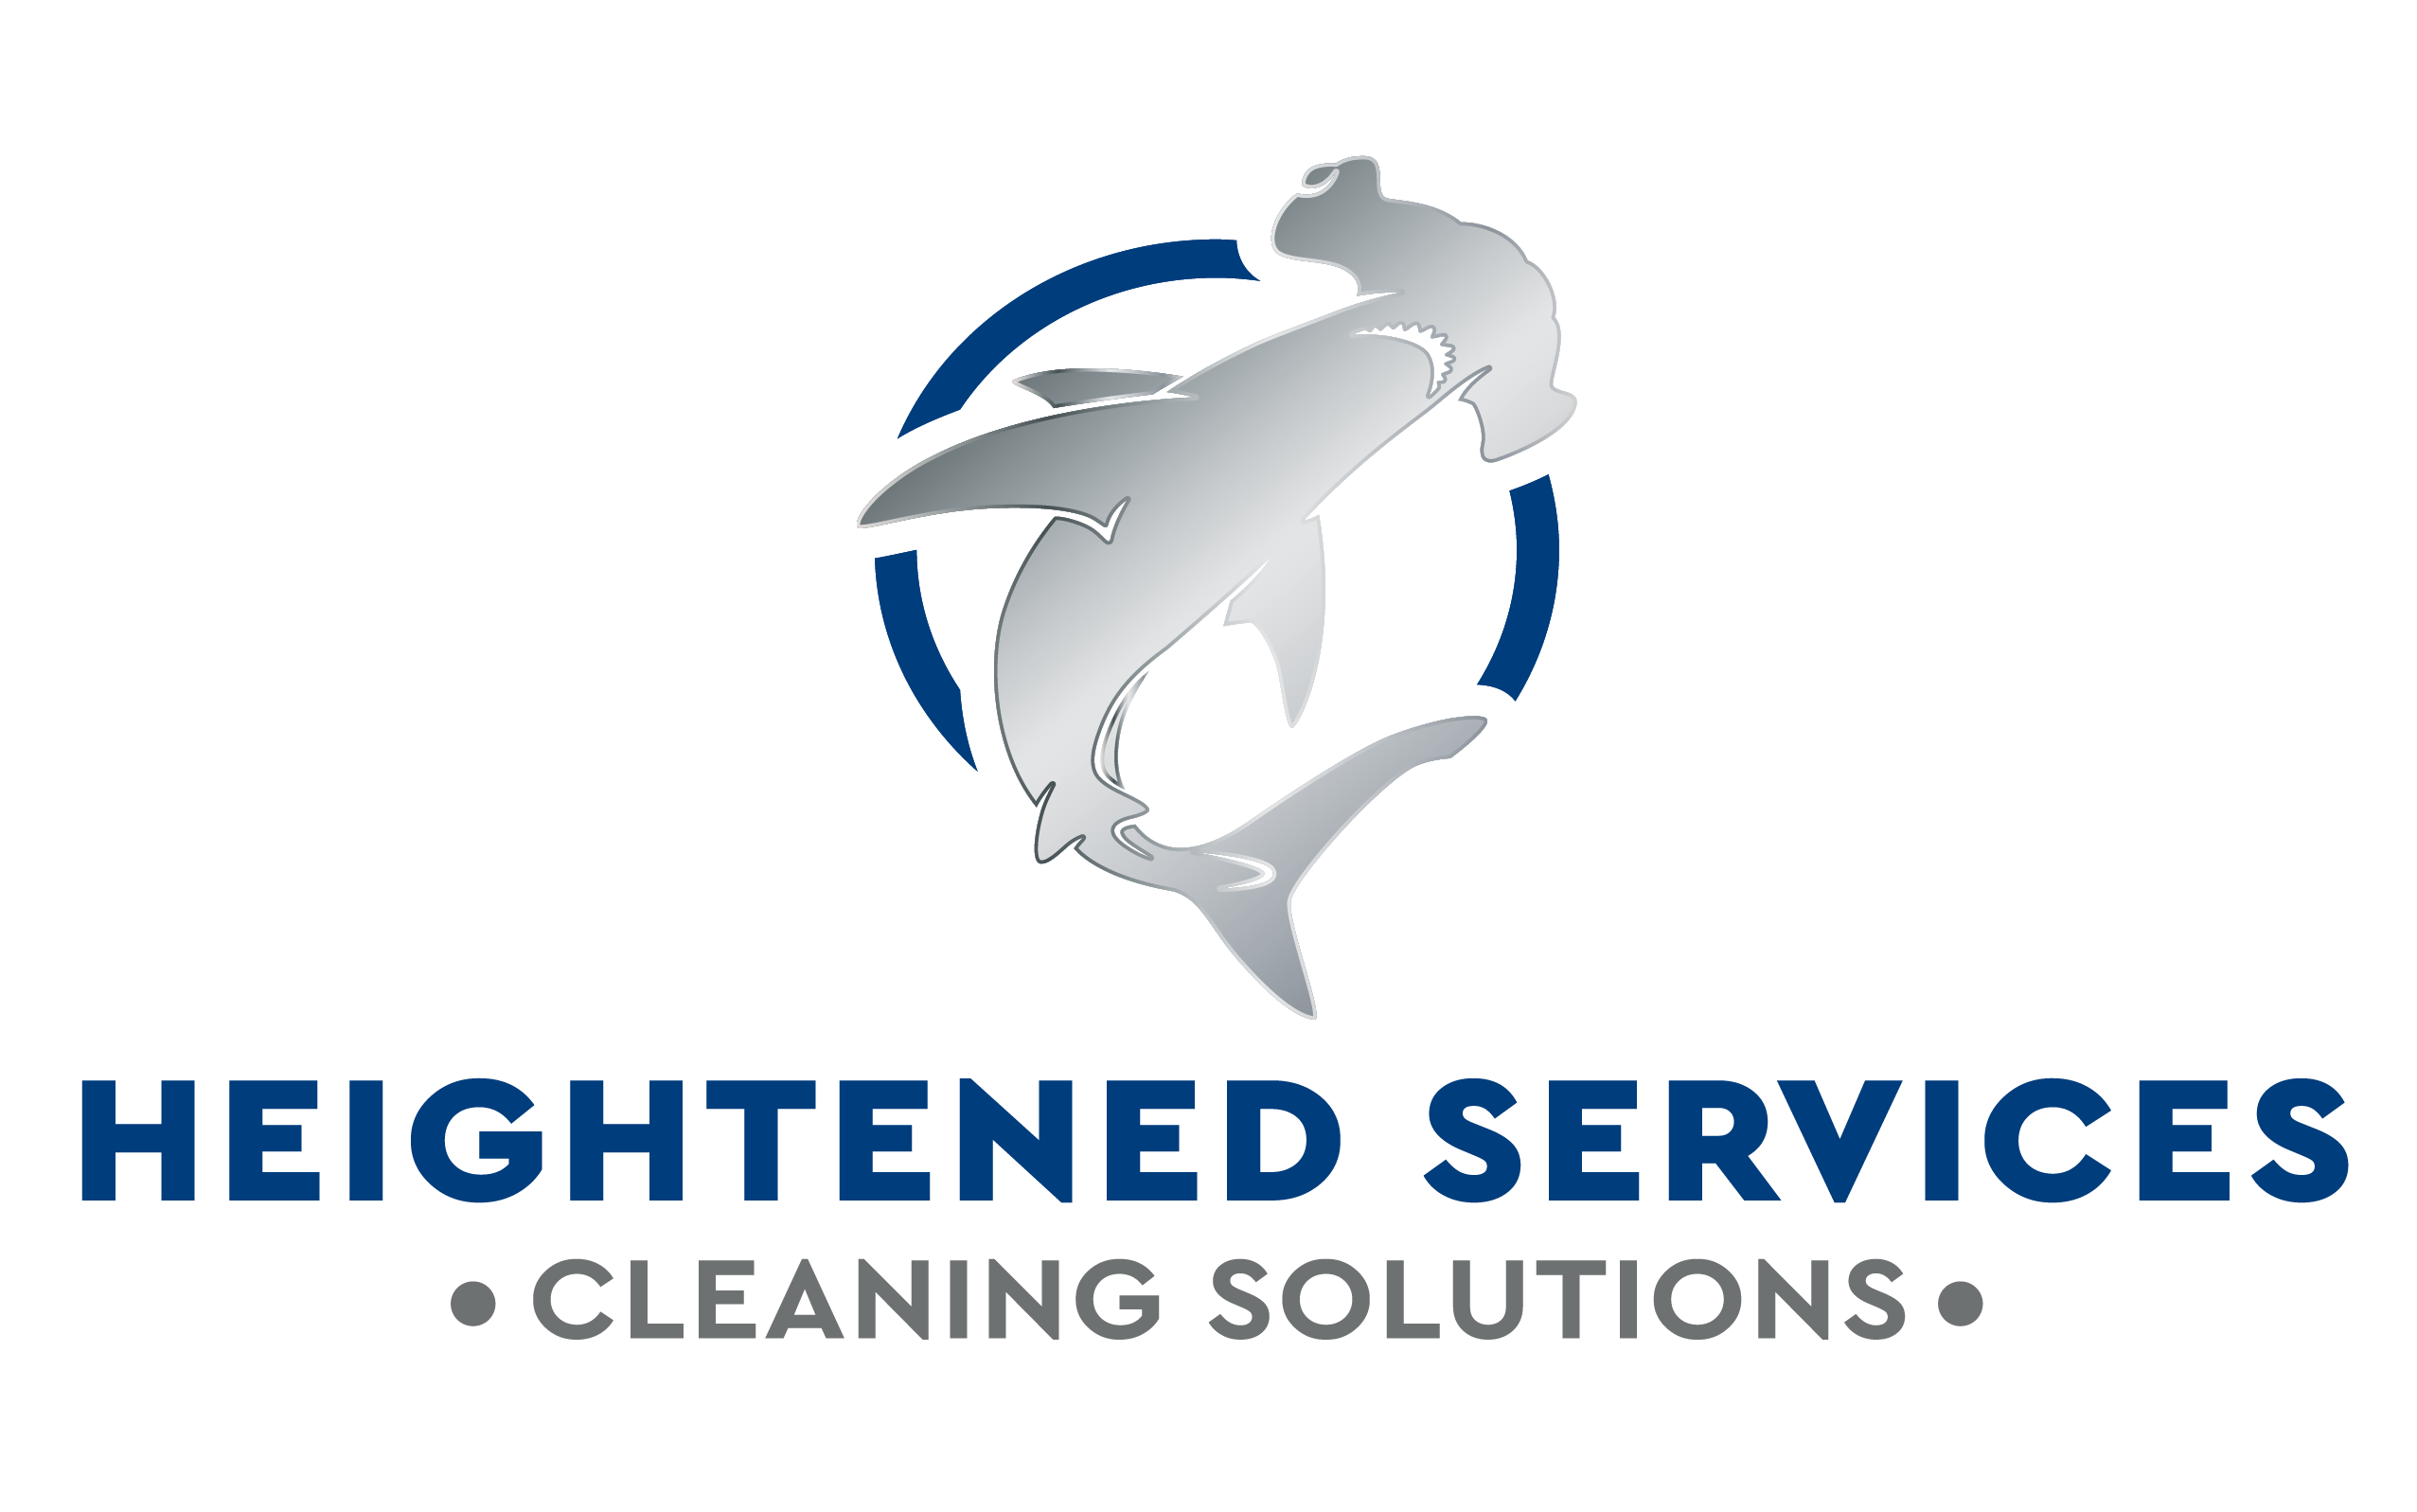 Heightened Services – Cleaning Solutions (heightenedcleaning.com.au)